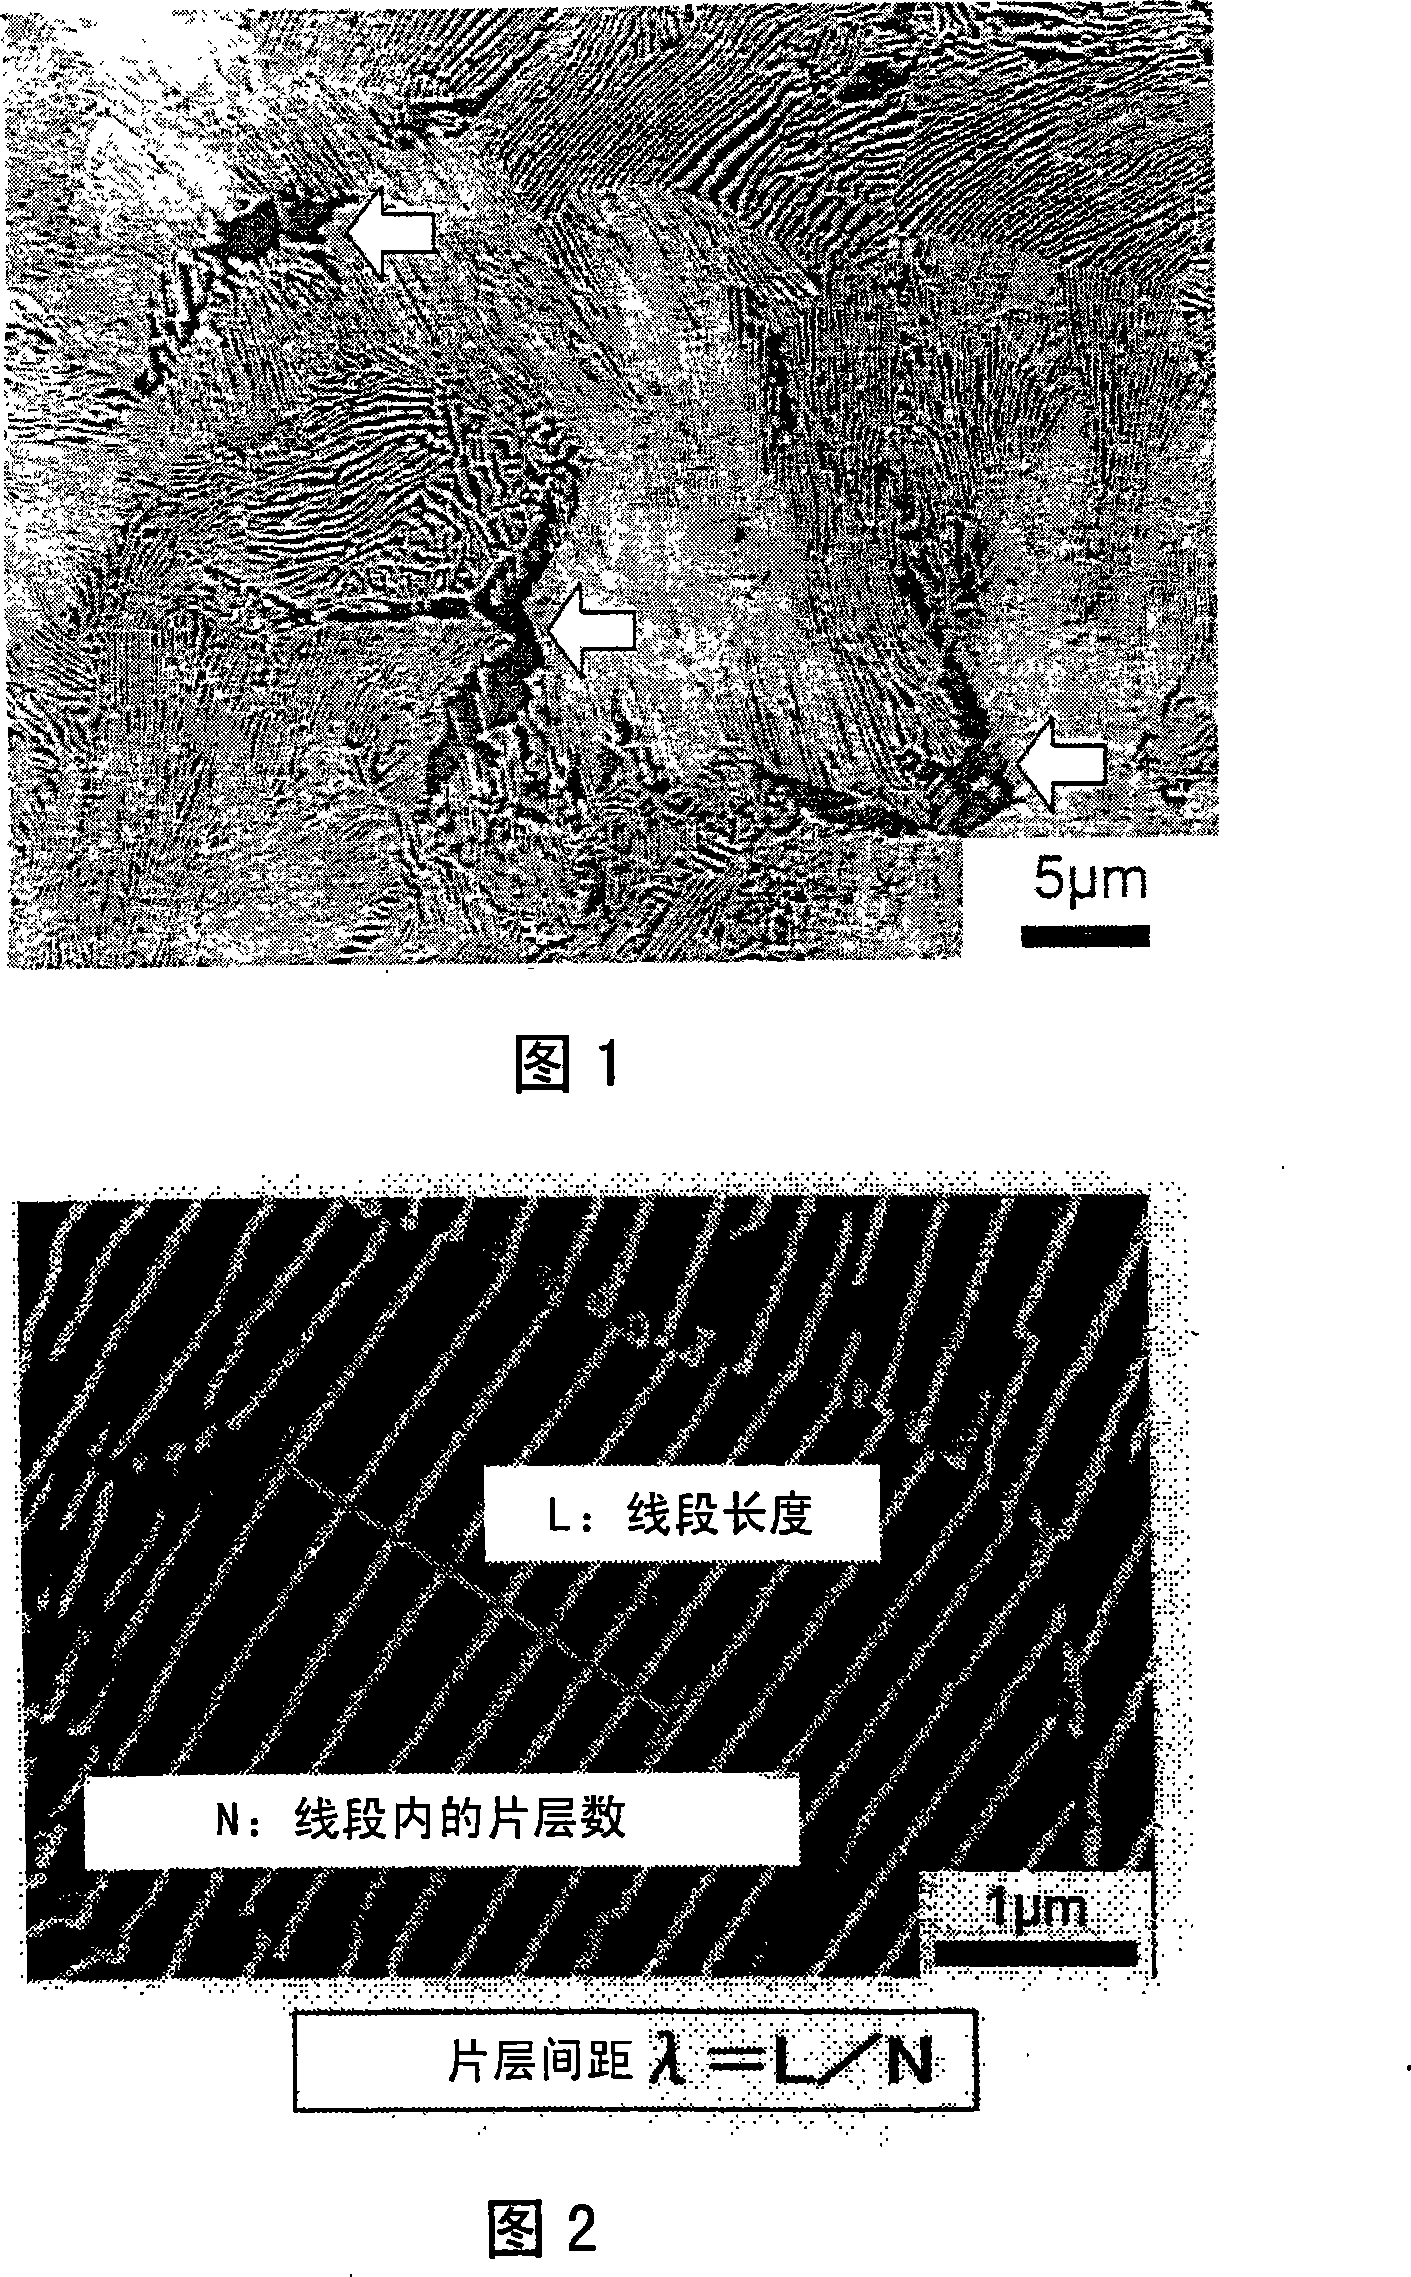 Wire rod excellent in wire-drawing workability and method for producing same